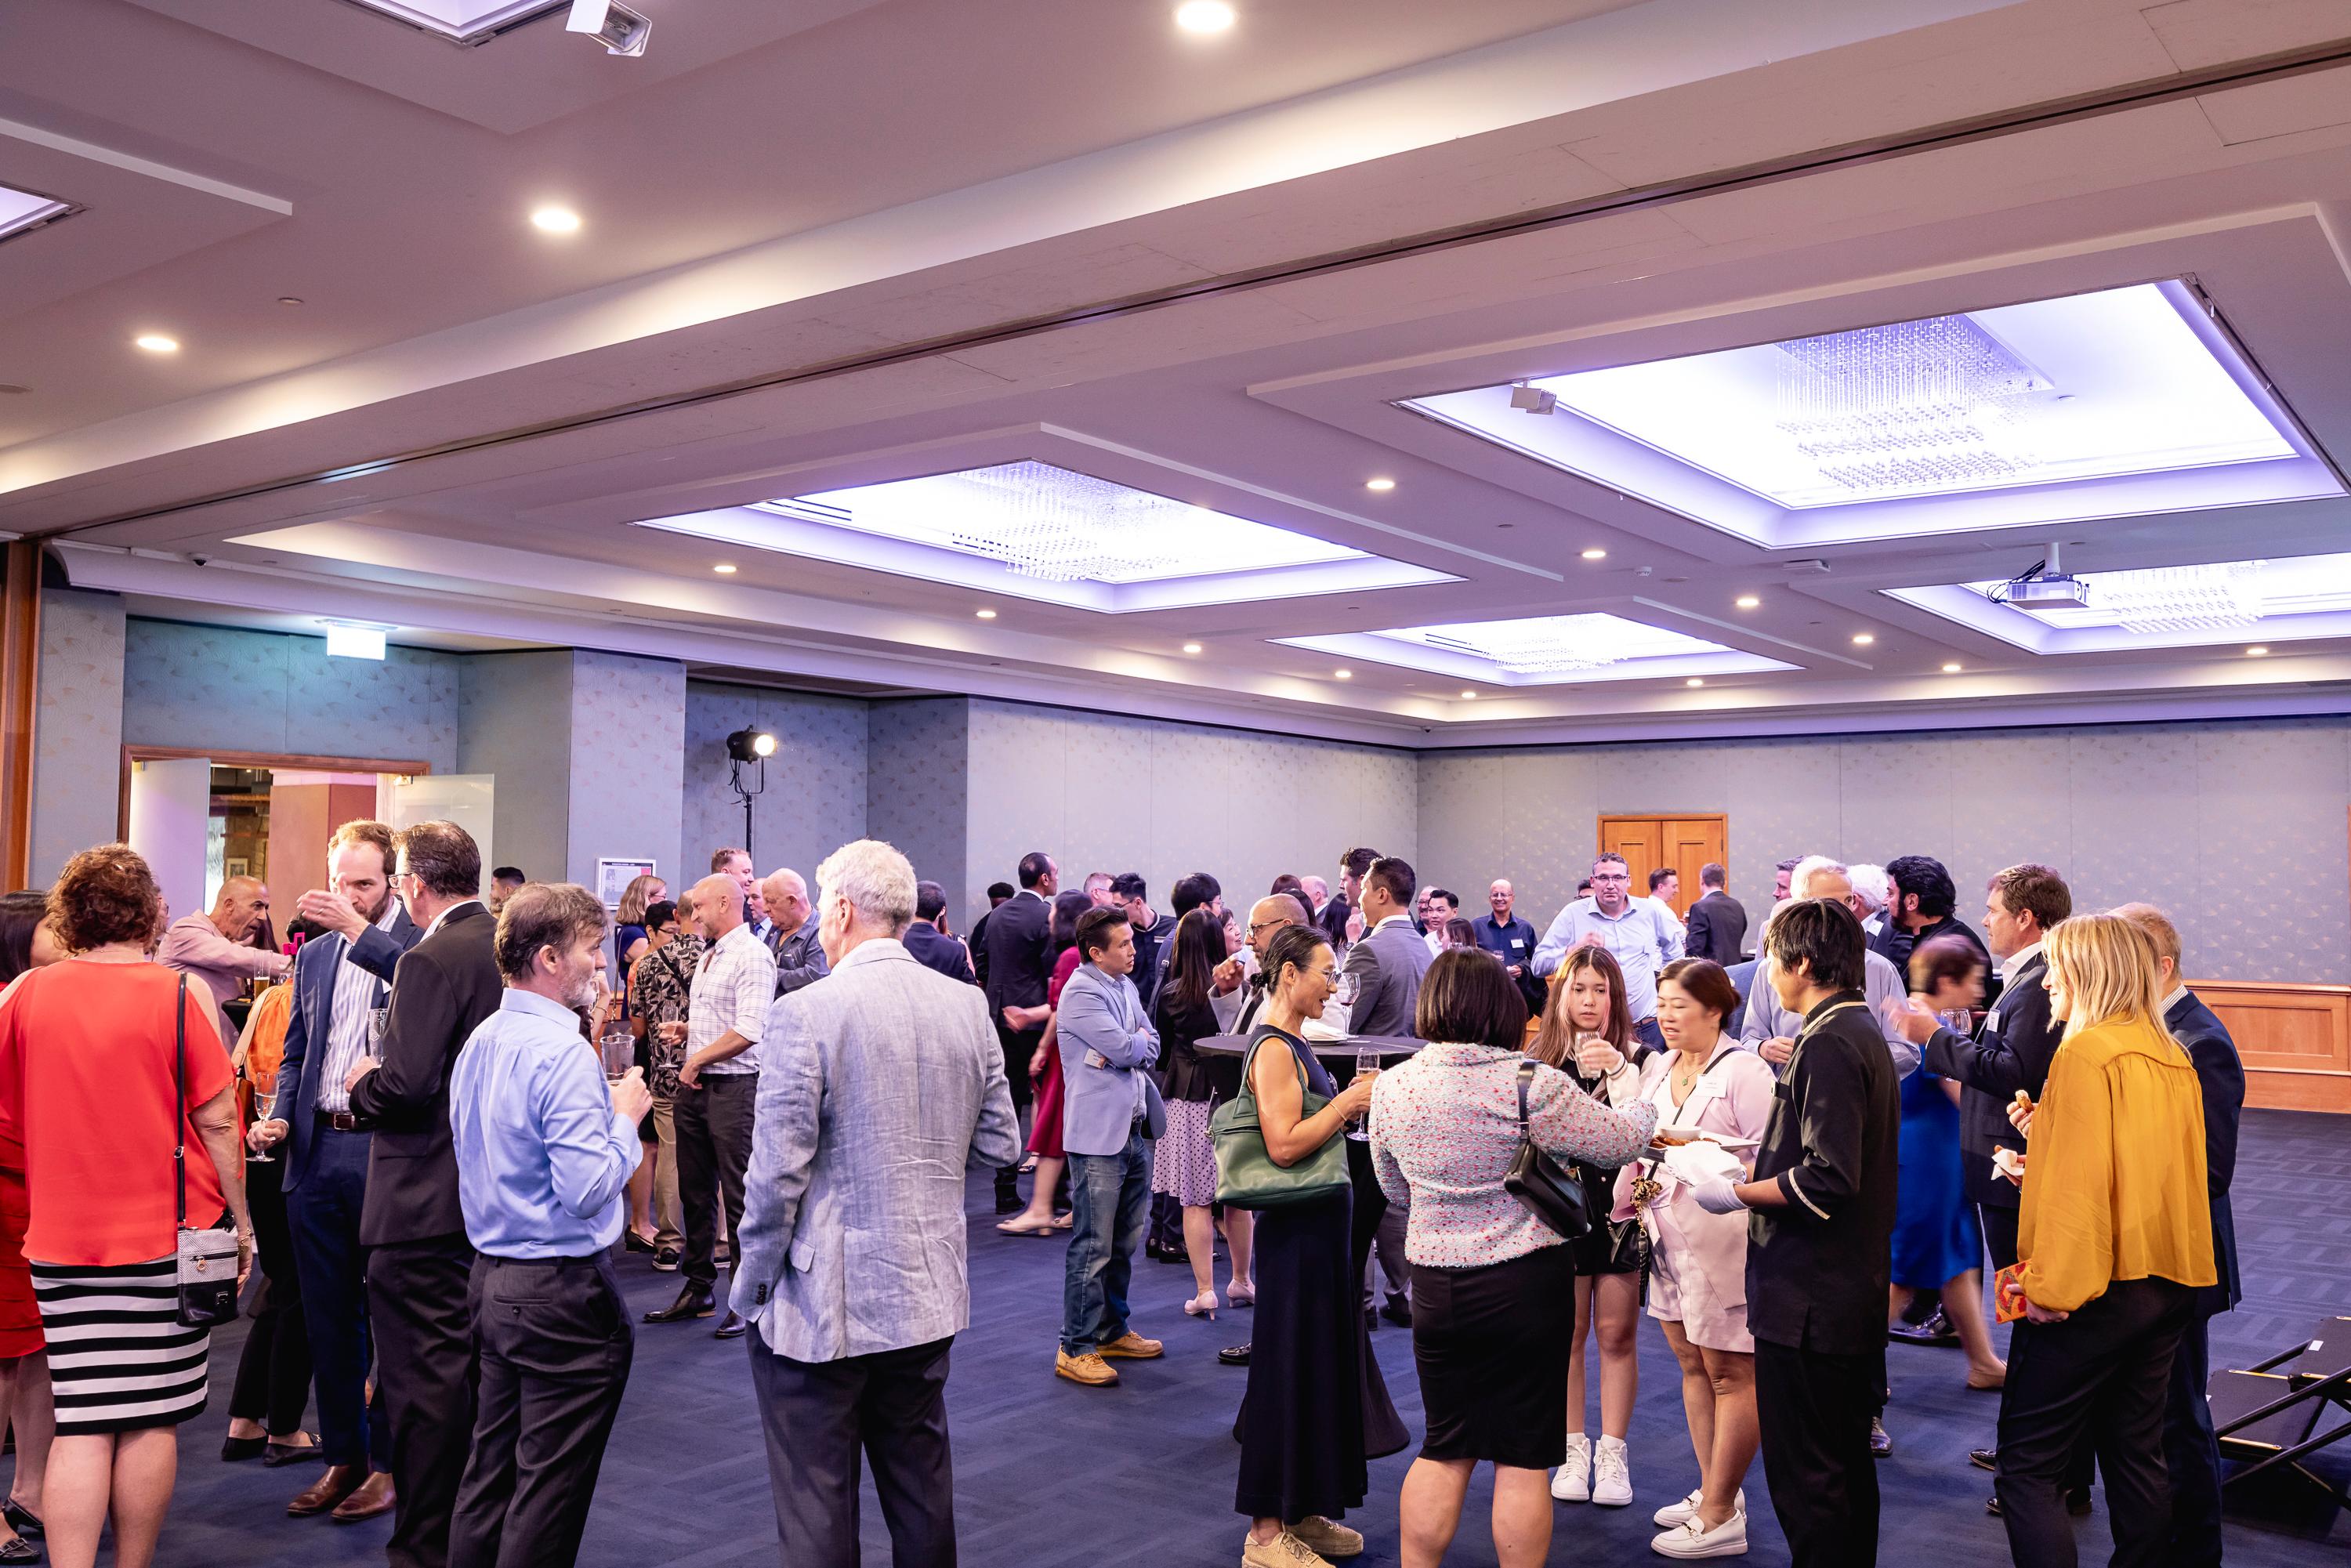 The Hong Kong Economic and Trade Office, Sydney hosted a reception in Perth, Australia, today (March 7) to celebrate Chinese New Year. Around 100 guests from various sectors including political and business circles, media, academic and community groups as well as government representatives attended the reception.